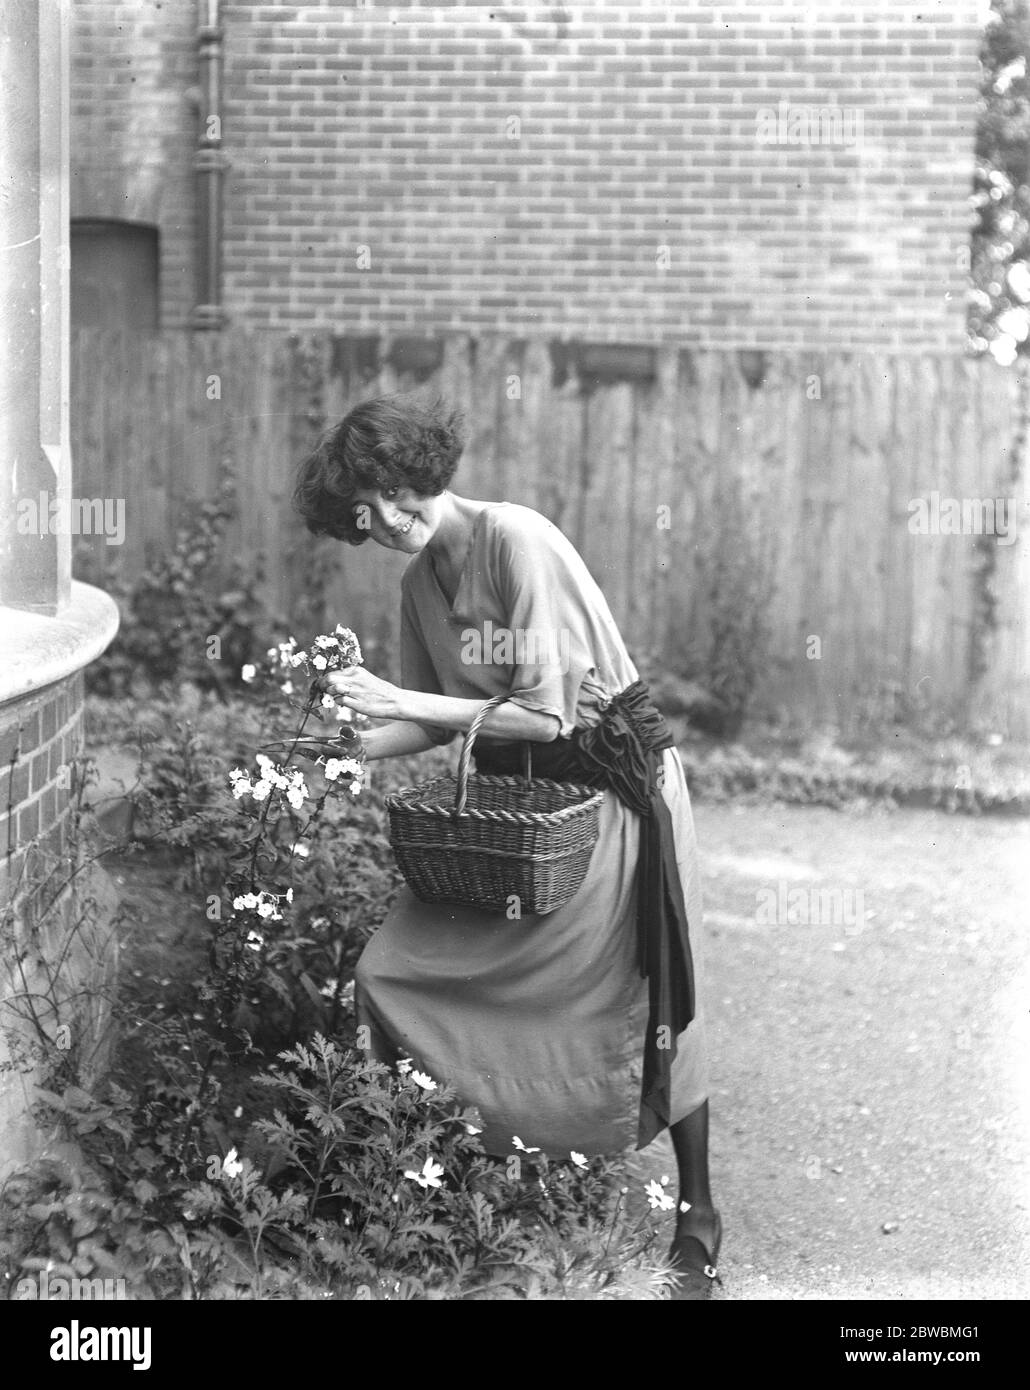 Duchess of Leinster by the Sea The Duchess of Leinster gatheringgarden flowers at Bournemouth in the ceremonial county of Dorset where she is staying 27 August 1923 Stock Photo